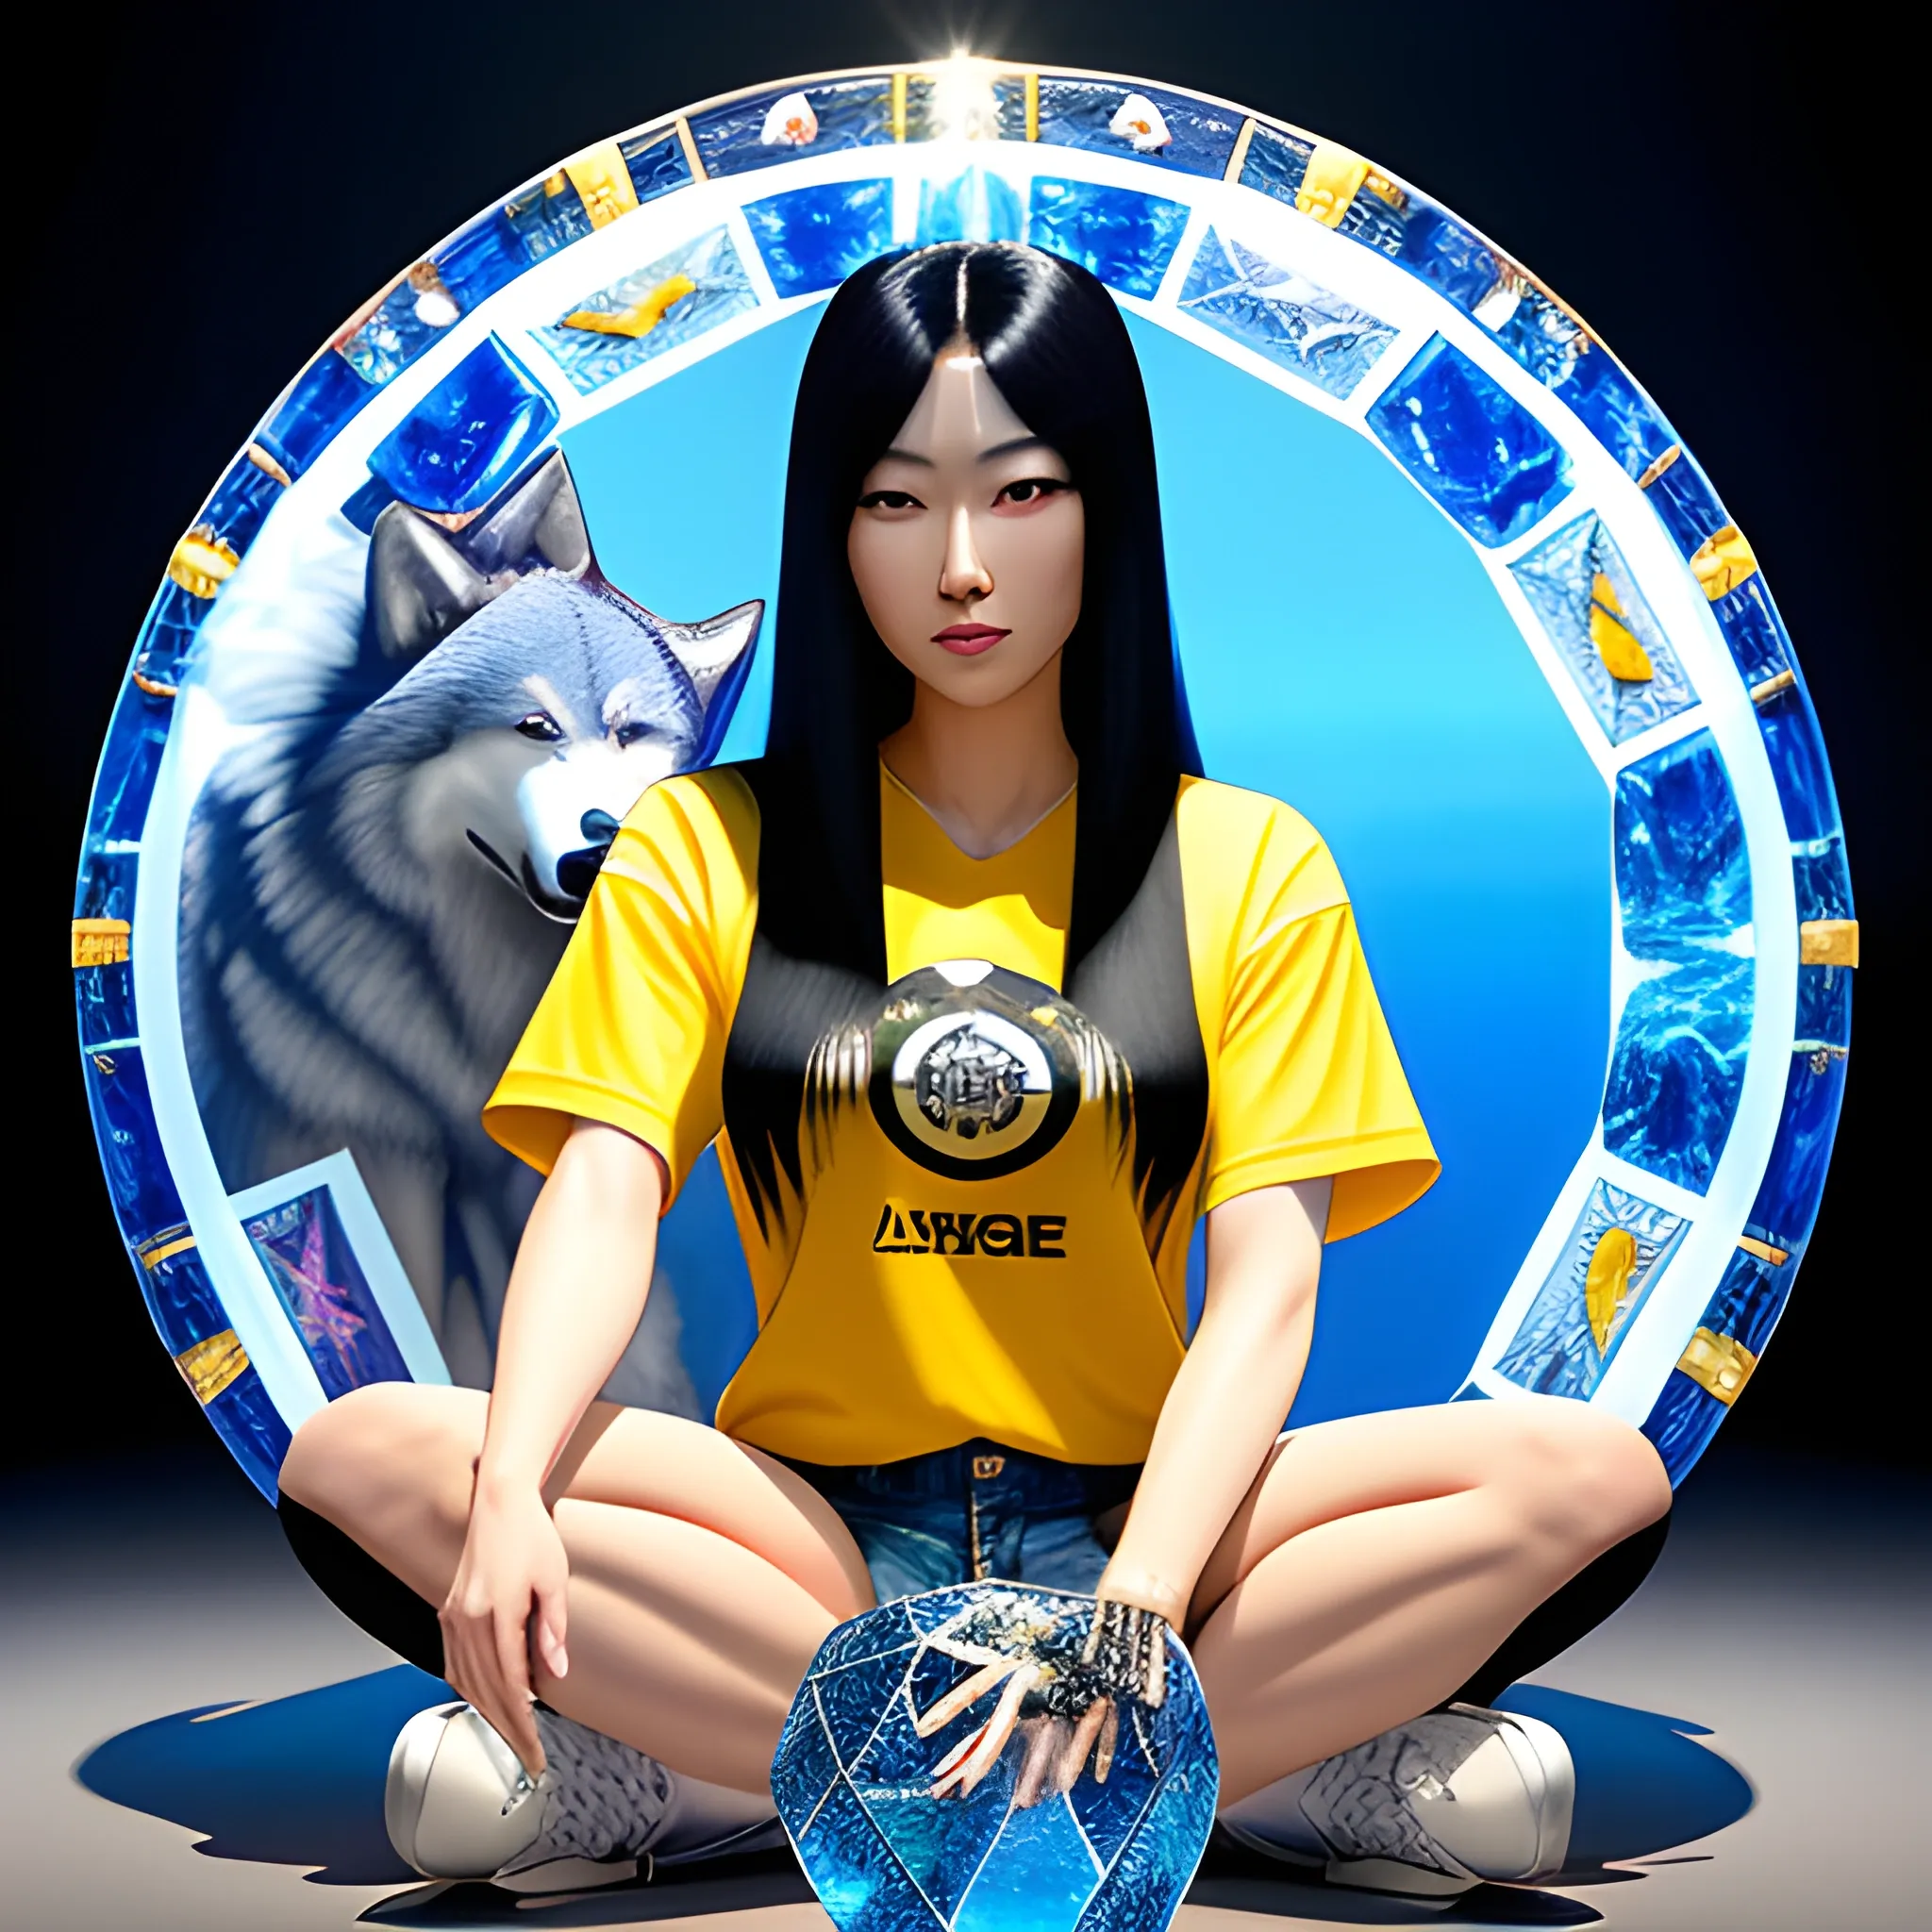 A beautiful Japanese girl with long black straight hair, wearing a yellow shirt with 'MALDITA' written on it, denim shorts, and white Nike shoes, sitting in a crystal circle with crock ice, accompanied by a large wolf with blue and white fur and blue eyes. The image should be a 3D realistic image